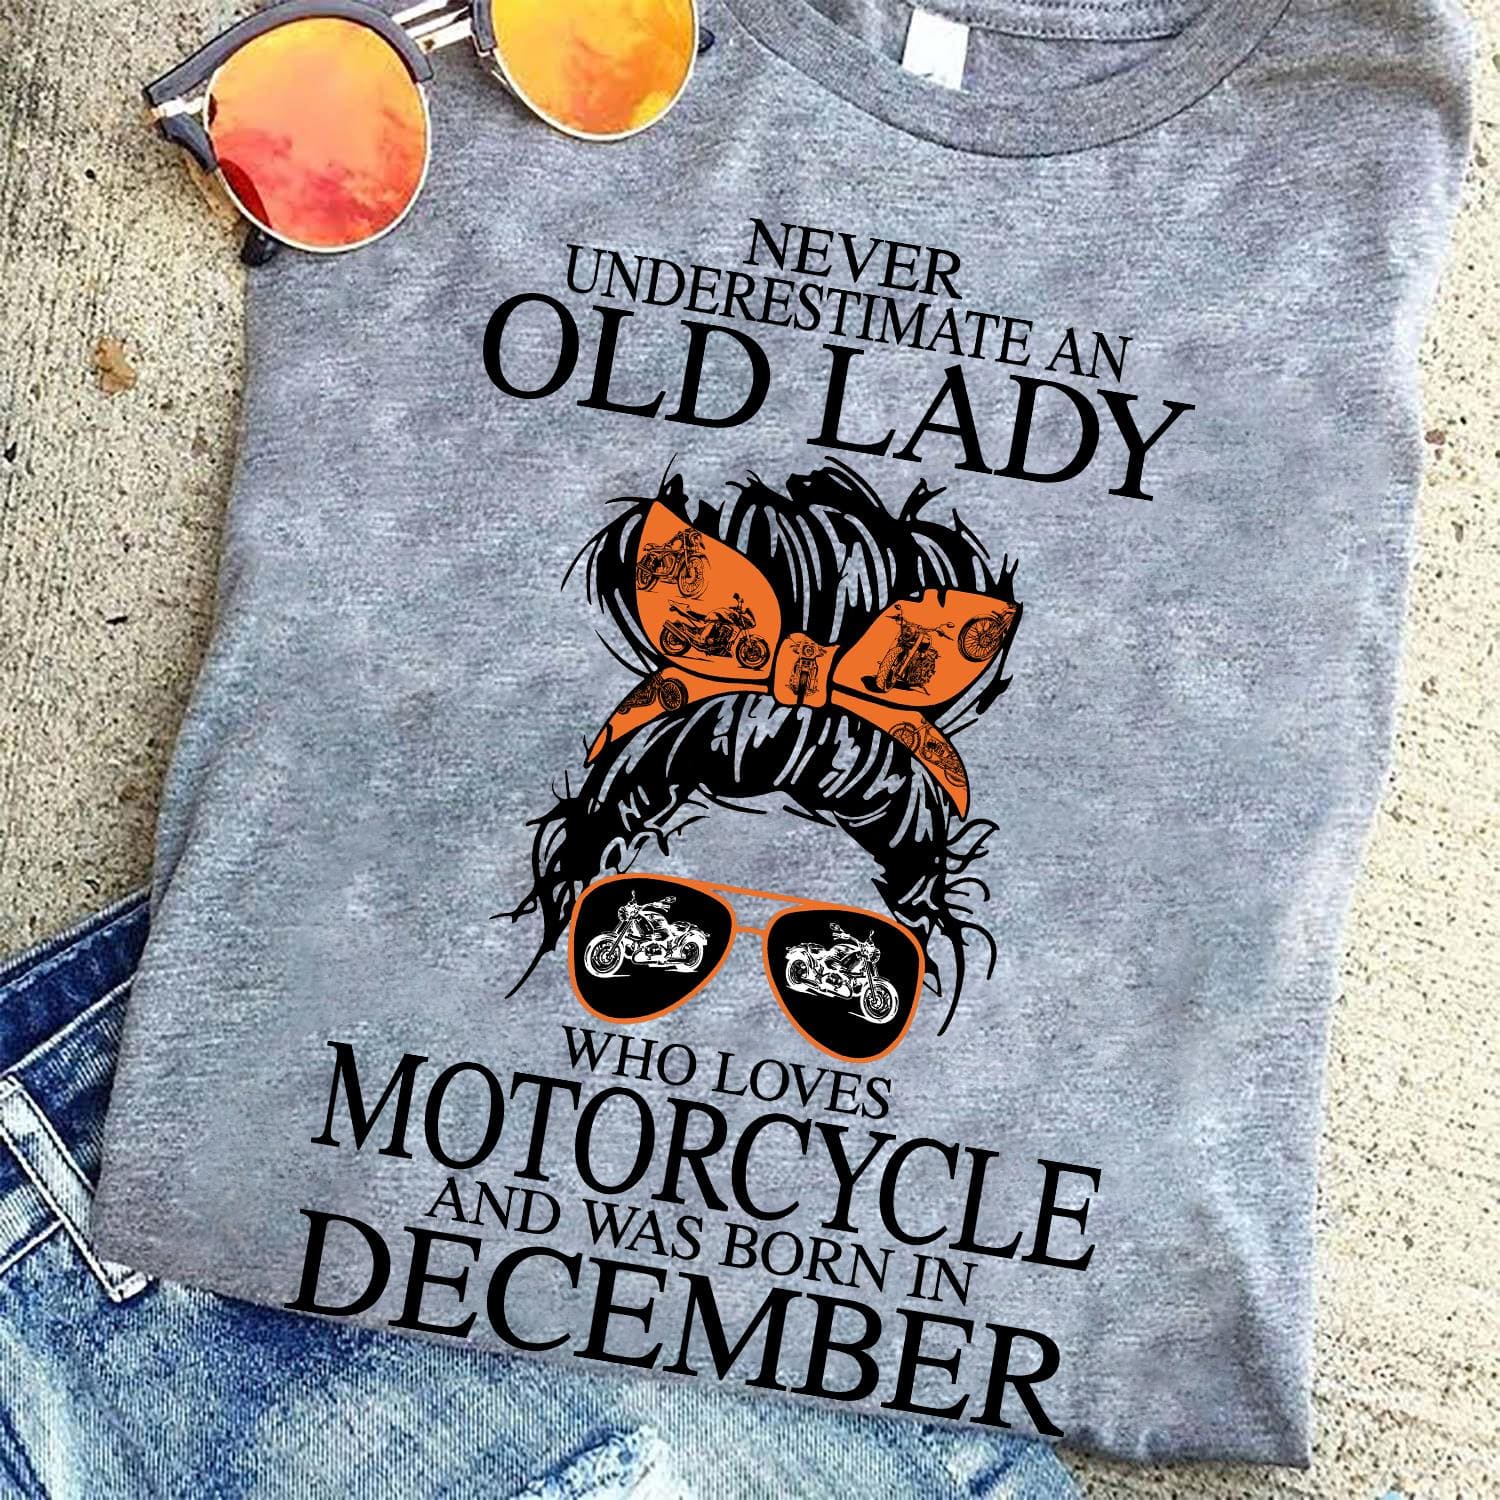 December Birthday Motorcycle Woman - Never underestimate old lady who loves motorcycle and was born in december